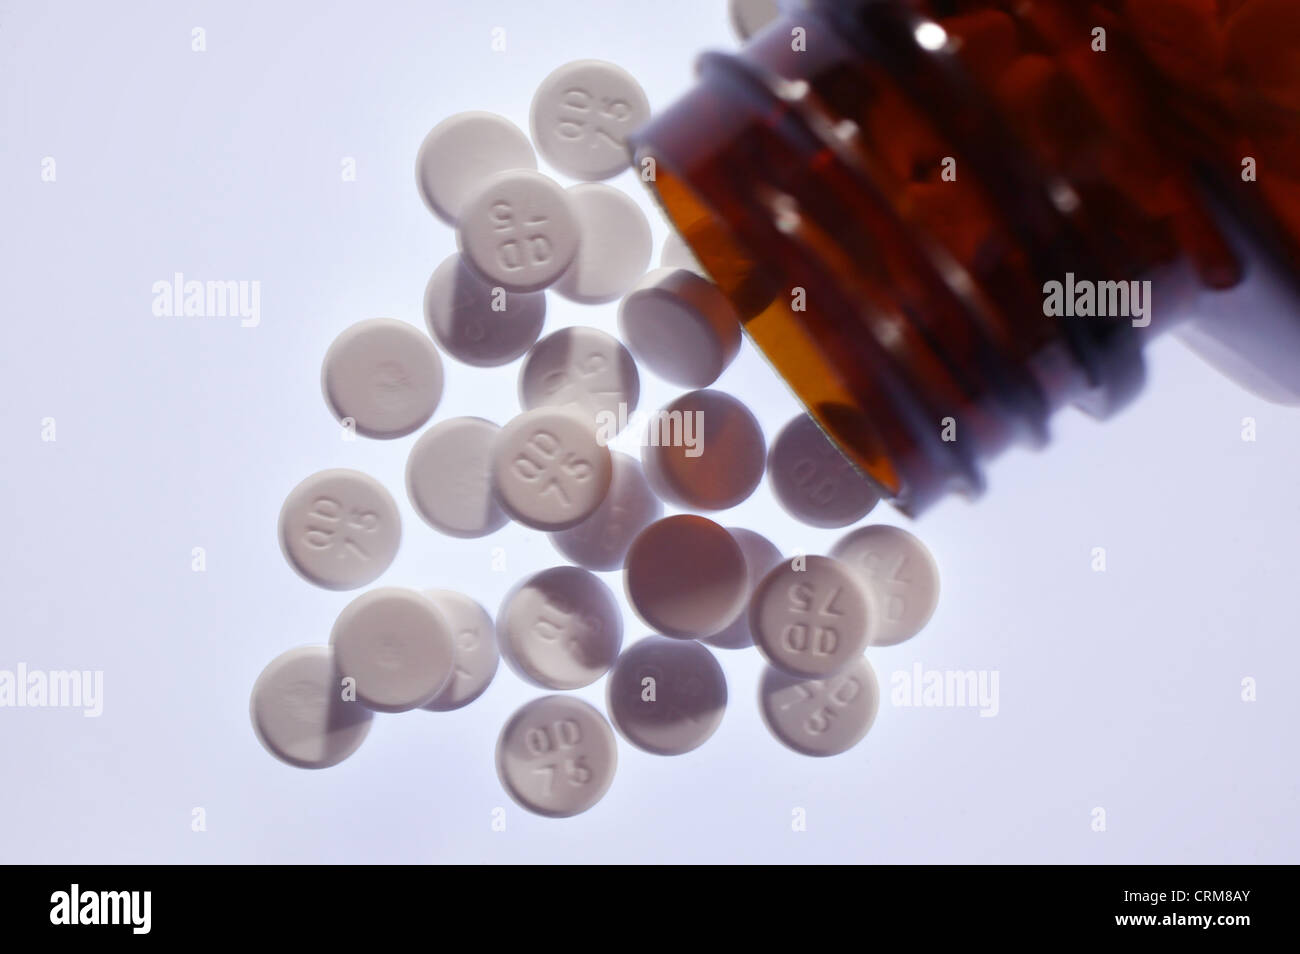 White paracetamol tablets spilling out of a brown bottle. Stock Photo